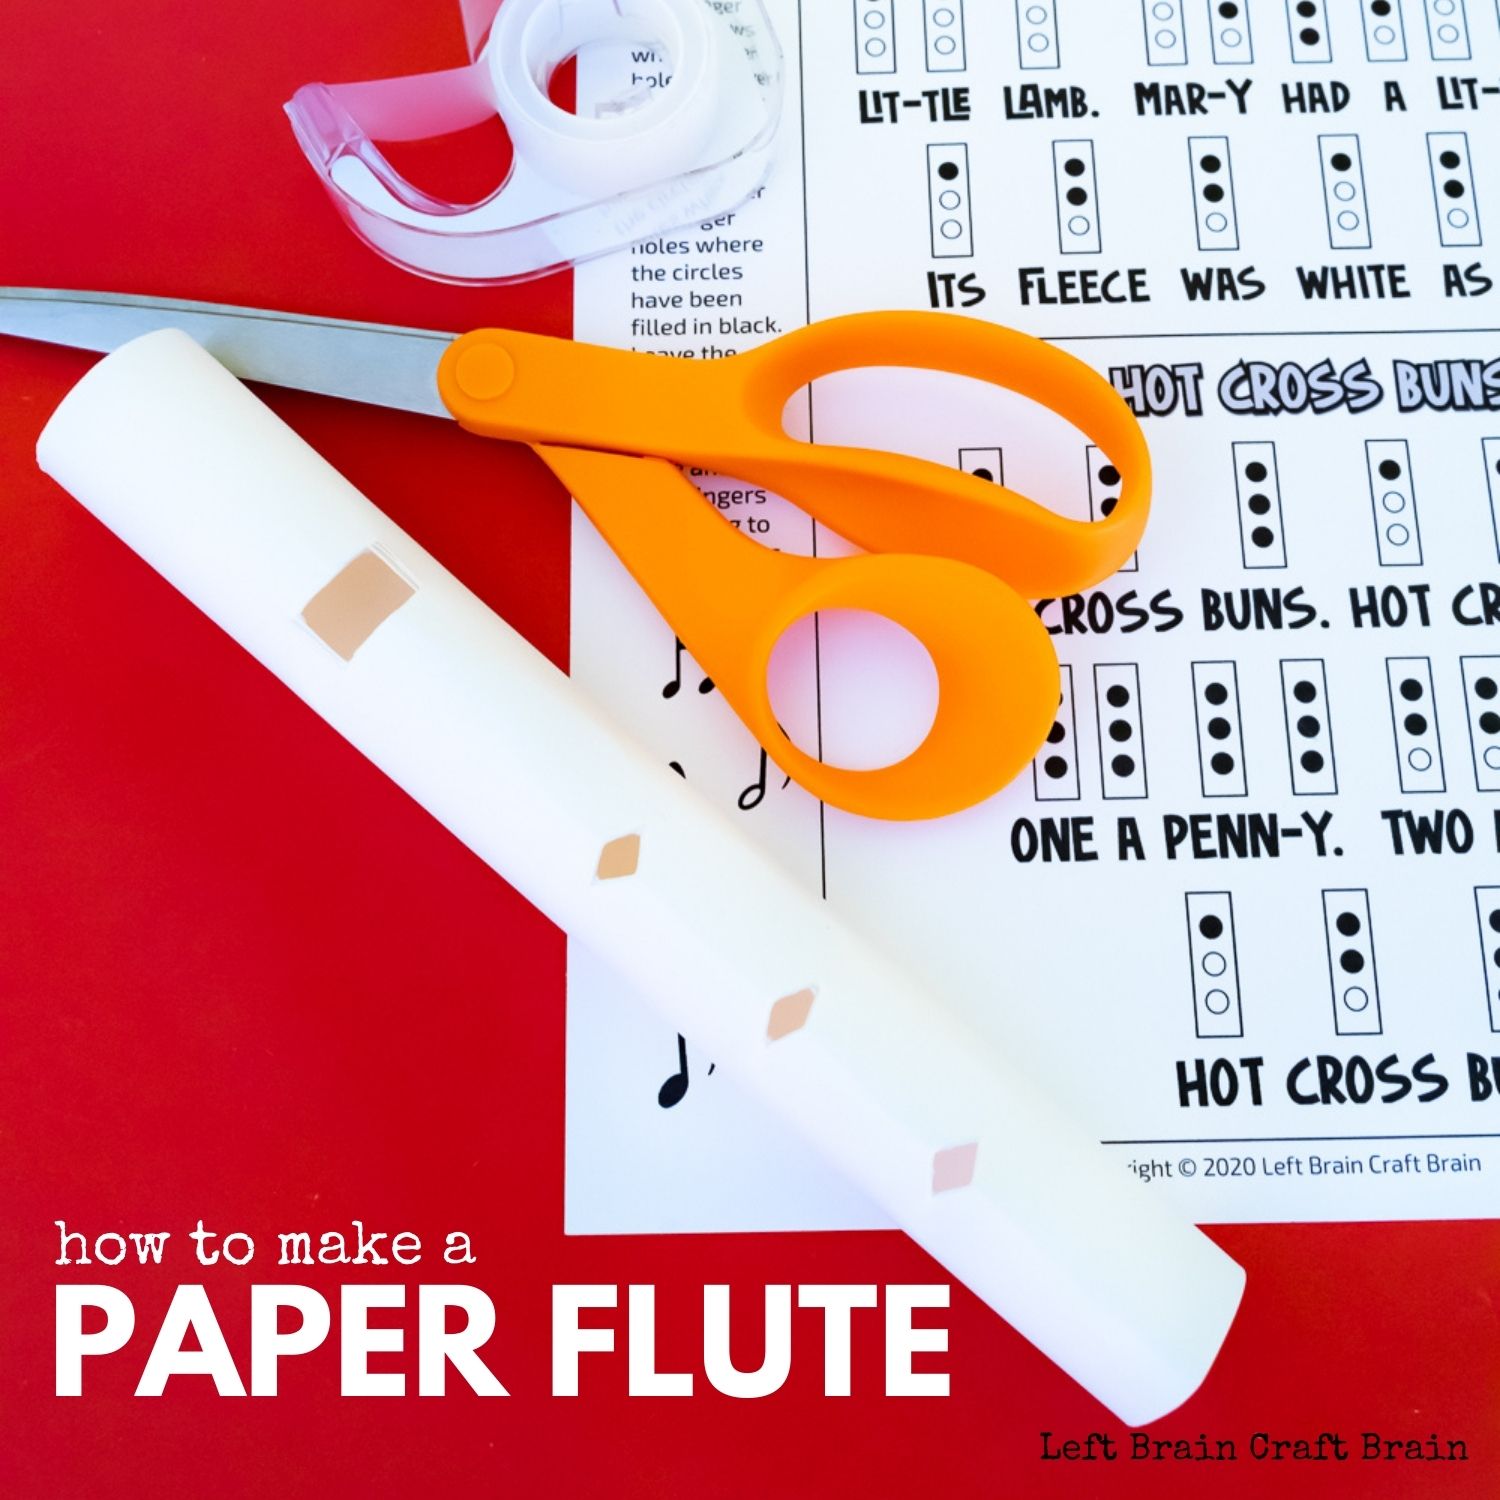 Paper flute, printed music, clear tape, orange-handled scissors on red background. Text: How to make a Paper Flute and Left Brain Craft Brain